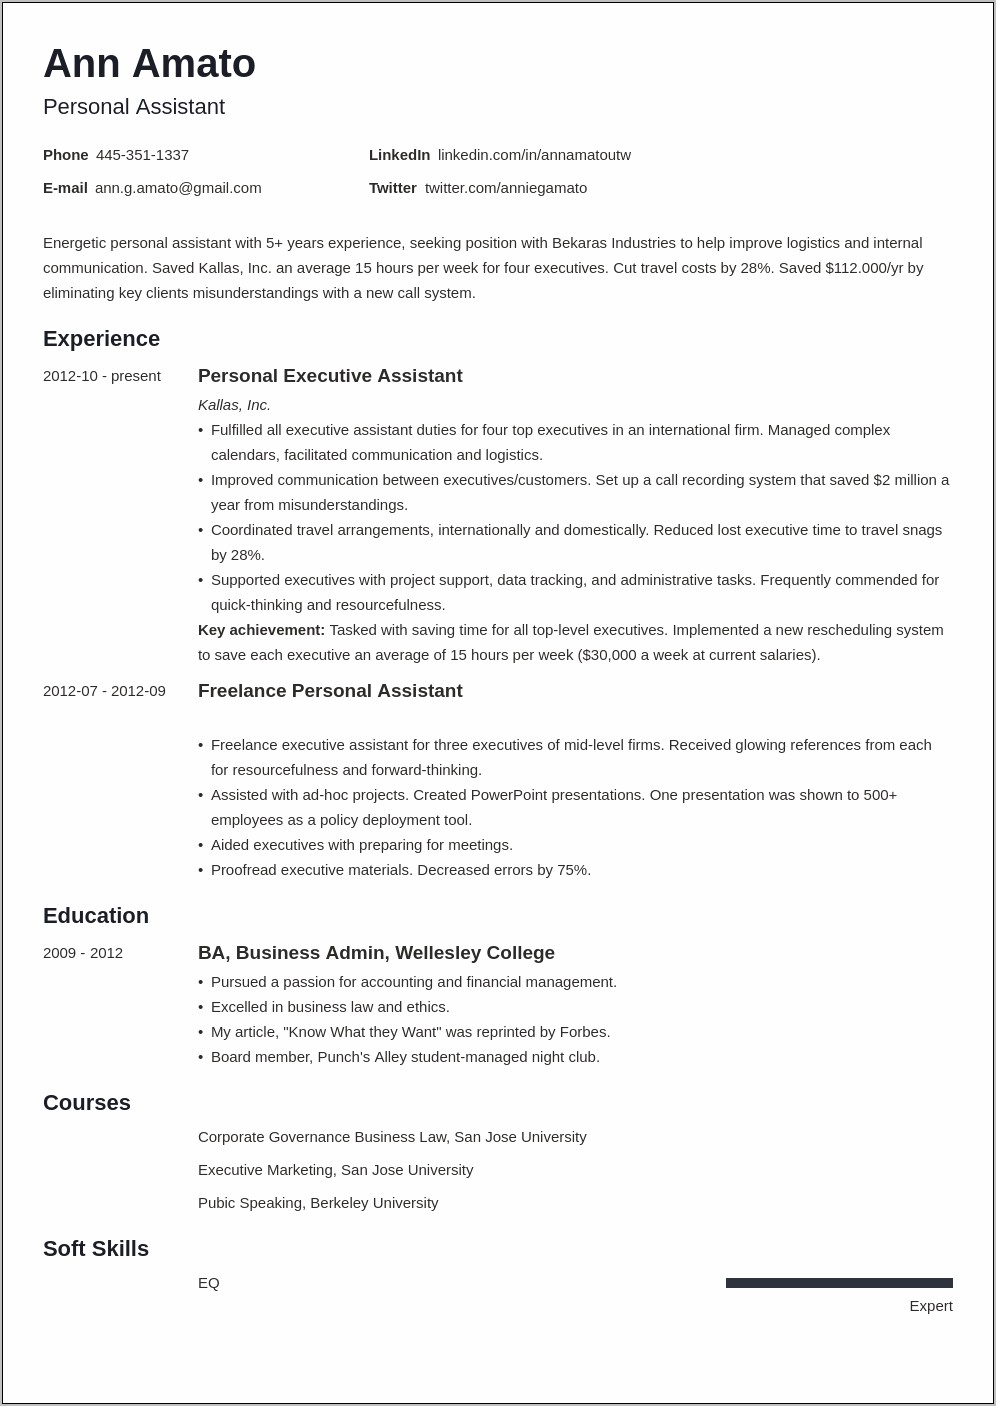 3 Month Job On Application But Not Resume